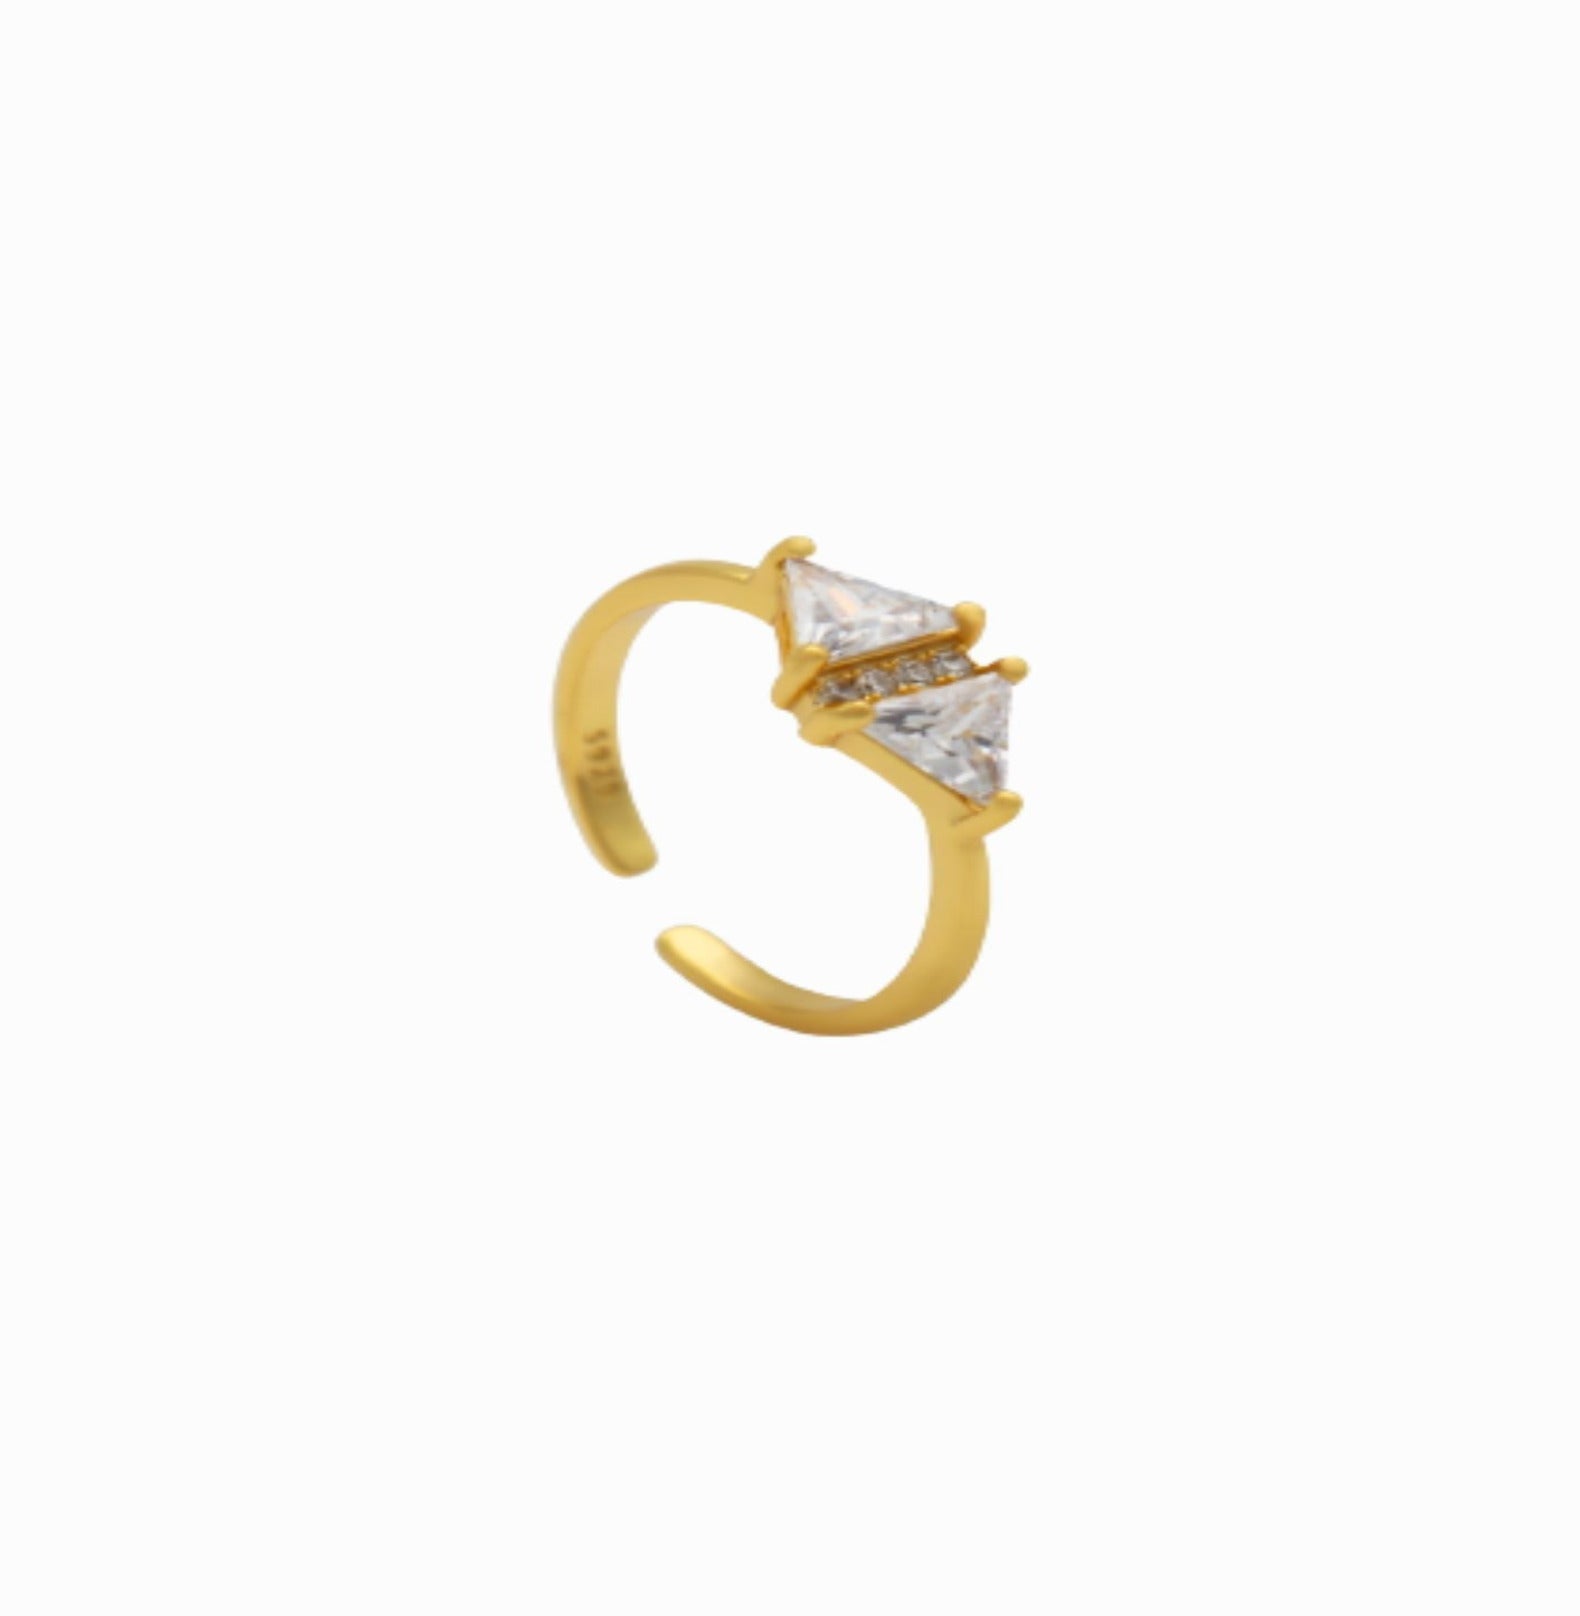 TRIANGLE RING ring Yubama Jewelry Online Store - The Elegant Designs of Gold and Silver ! 